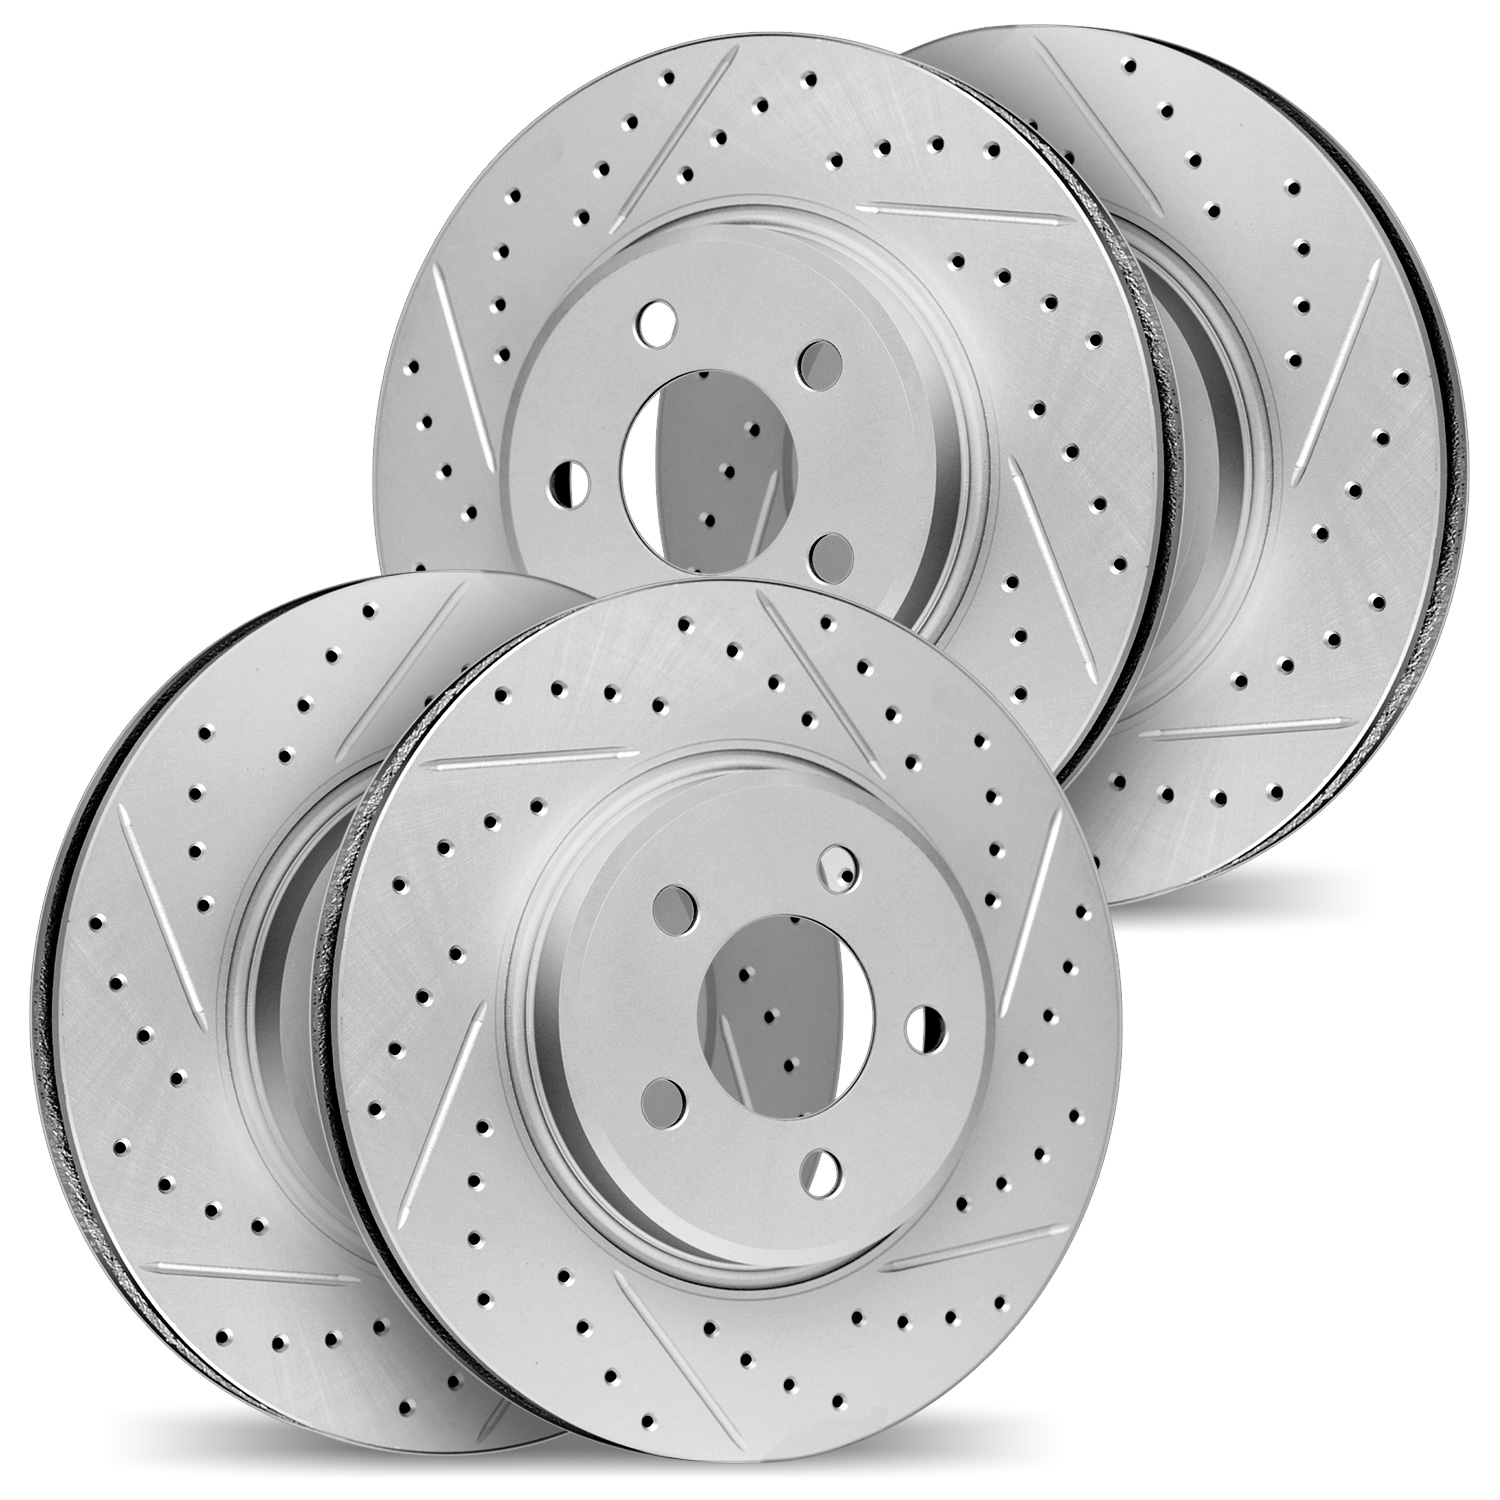 2004-72026 Geoperformance Drilled/Slotted Brake Rotors, 2008-2015 Mitsubishi, Position: Front and Rear